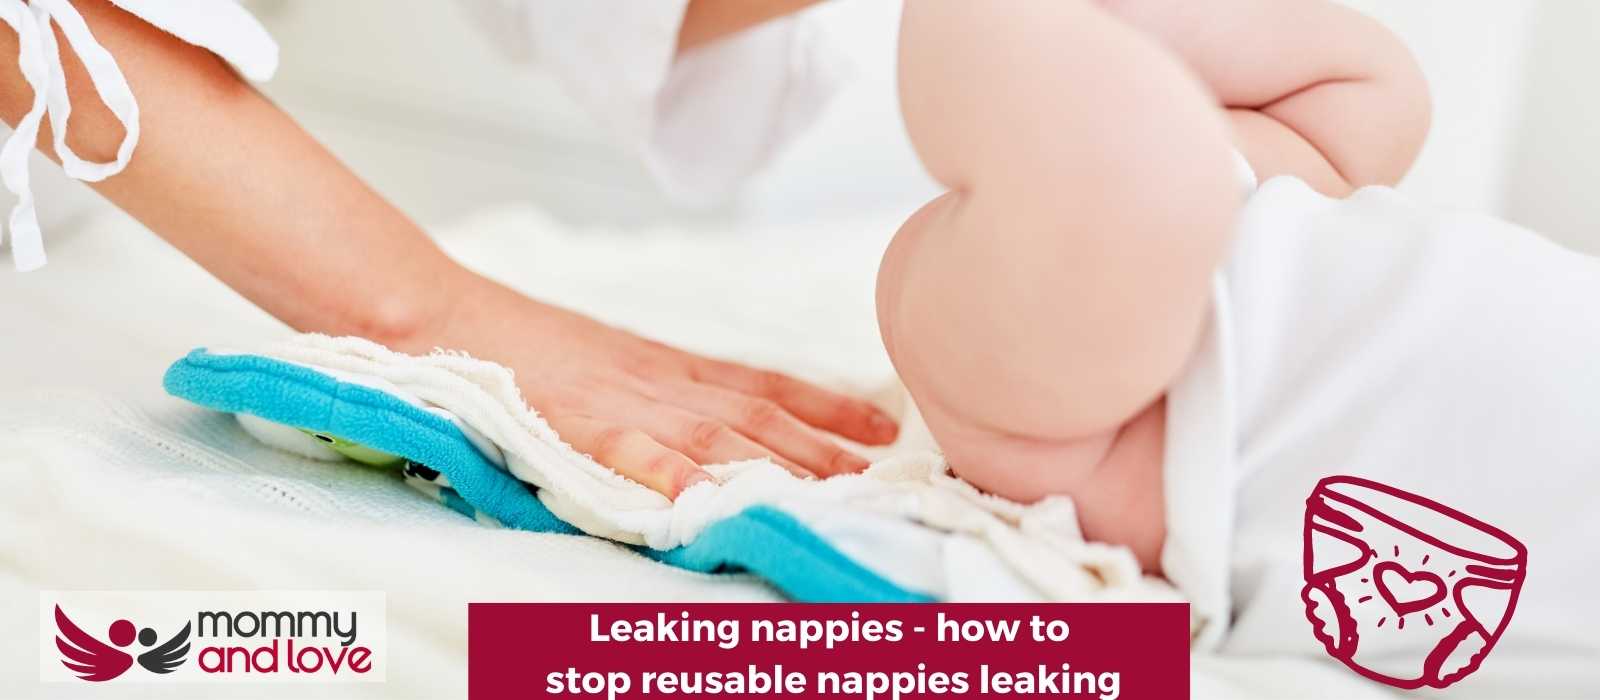 Leaking nappies - how to stop reusable nappies leaking